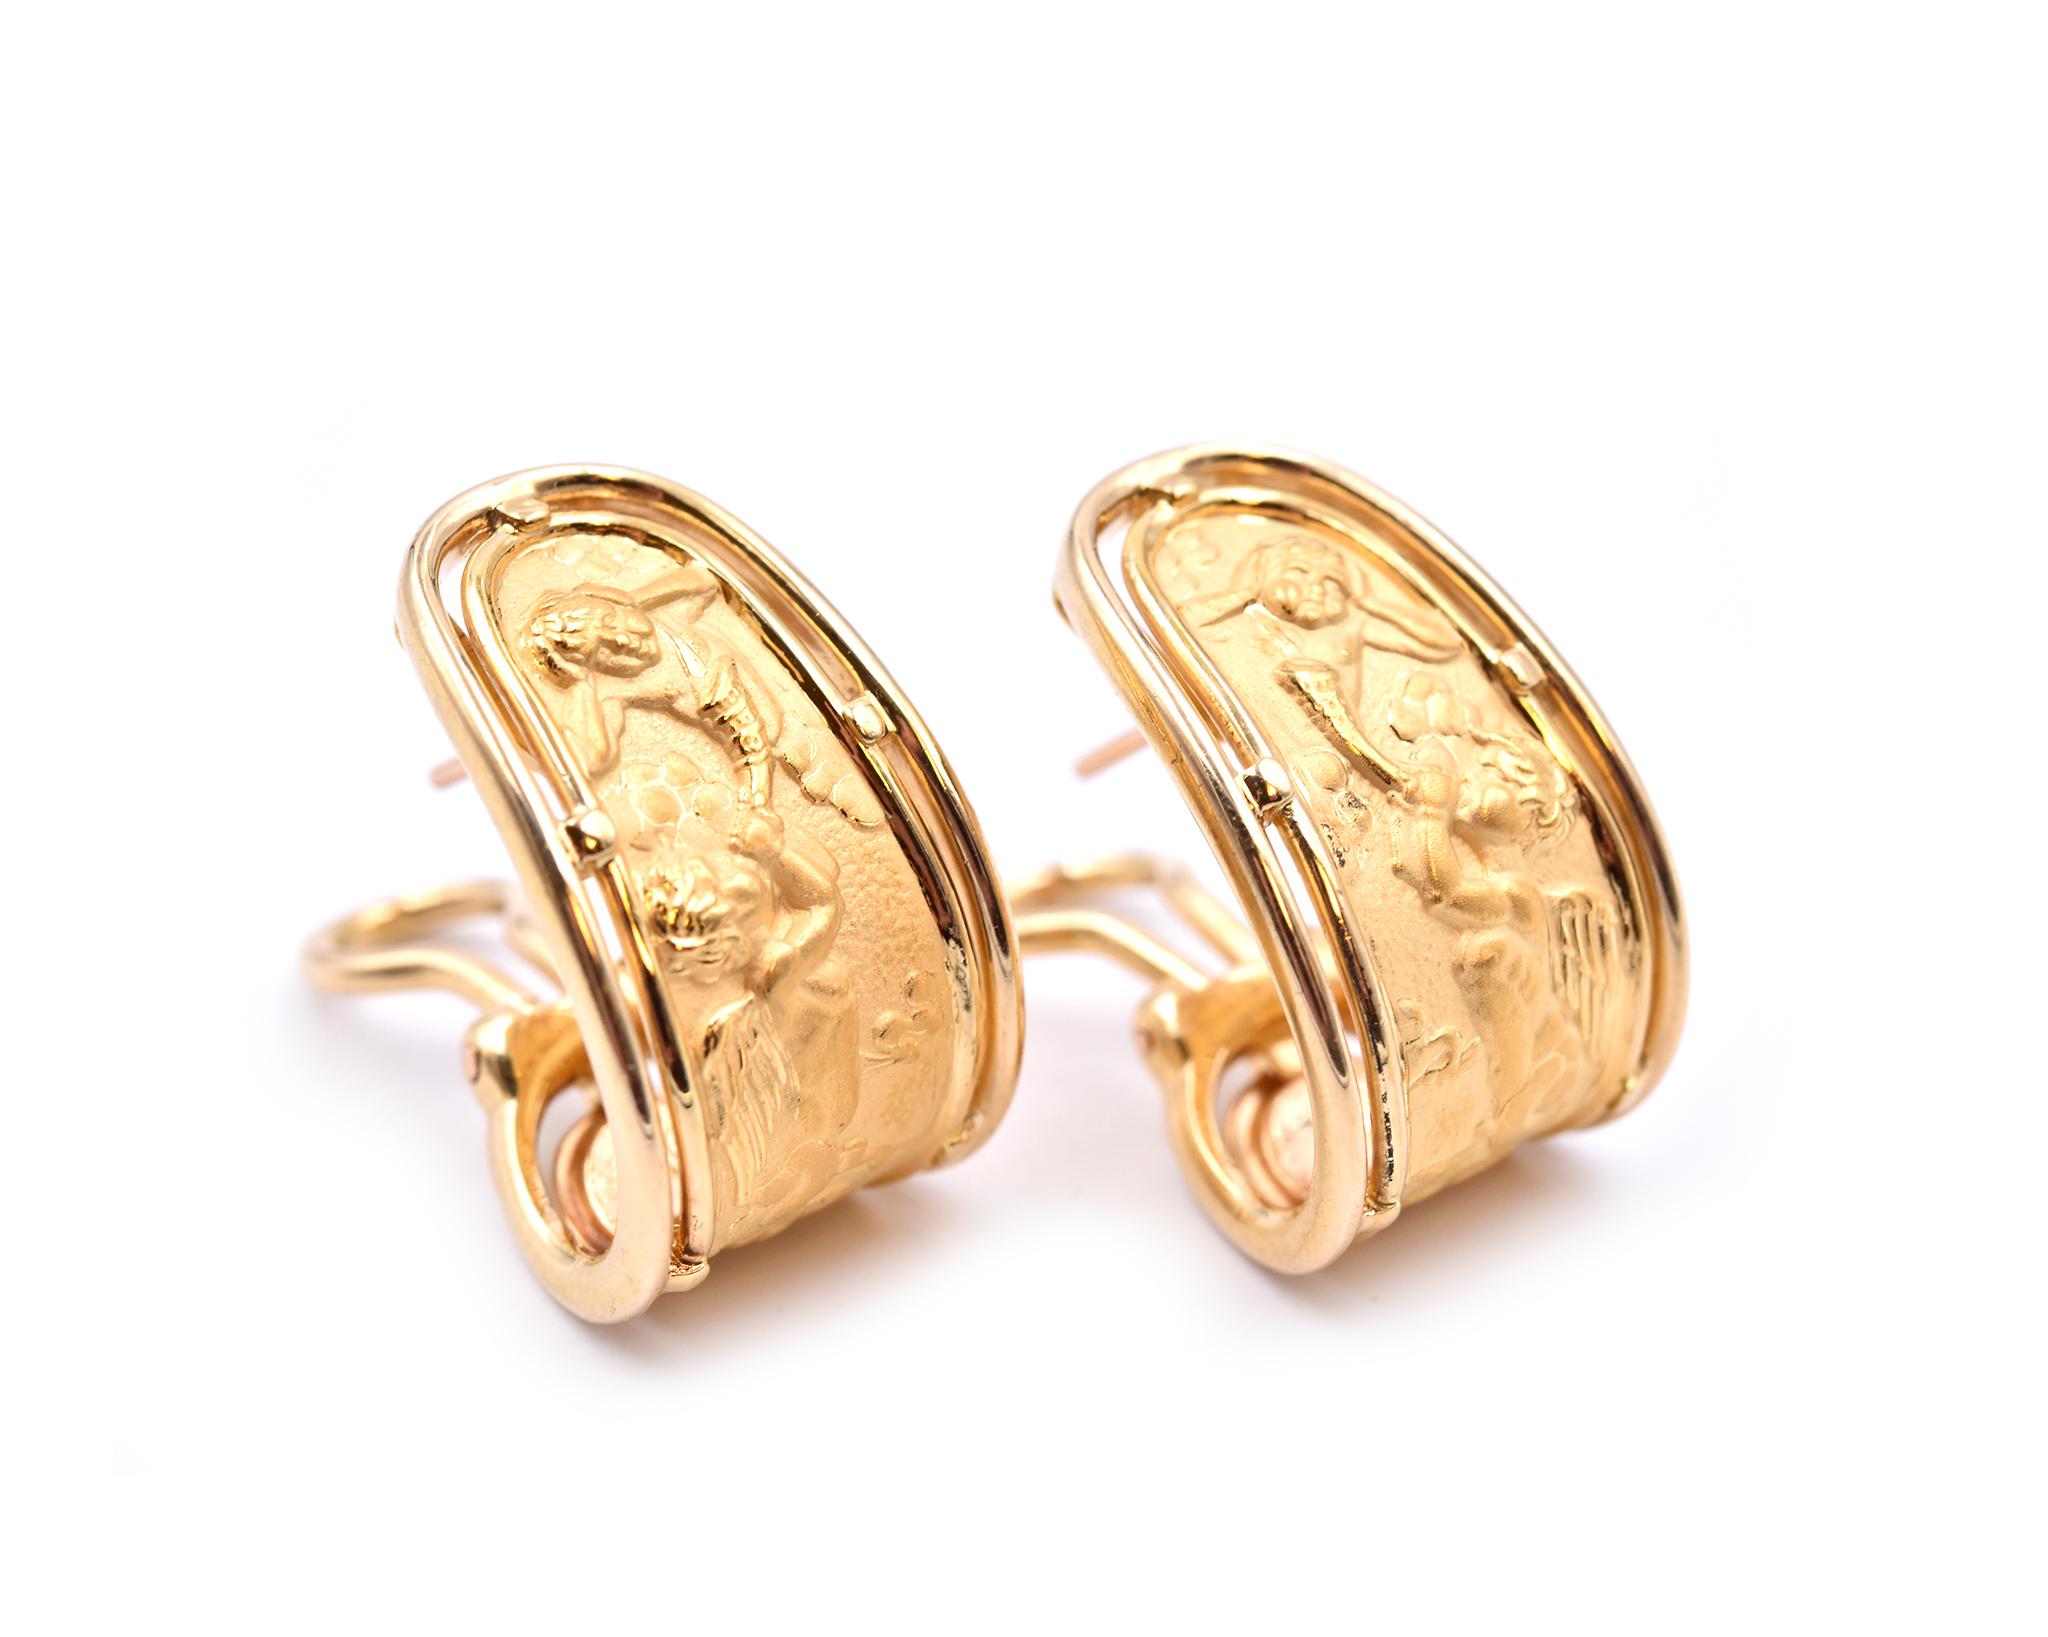 Designer: Carrera y Carrera
Material: 18k yellow gold 
Fastenings: post with Omega backs
Dimensions: earrings are approximately 13.38mm by 21.50mm 
Weight: 11.55 grams
